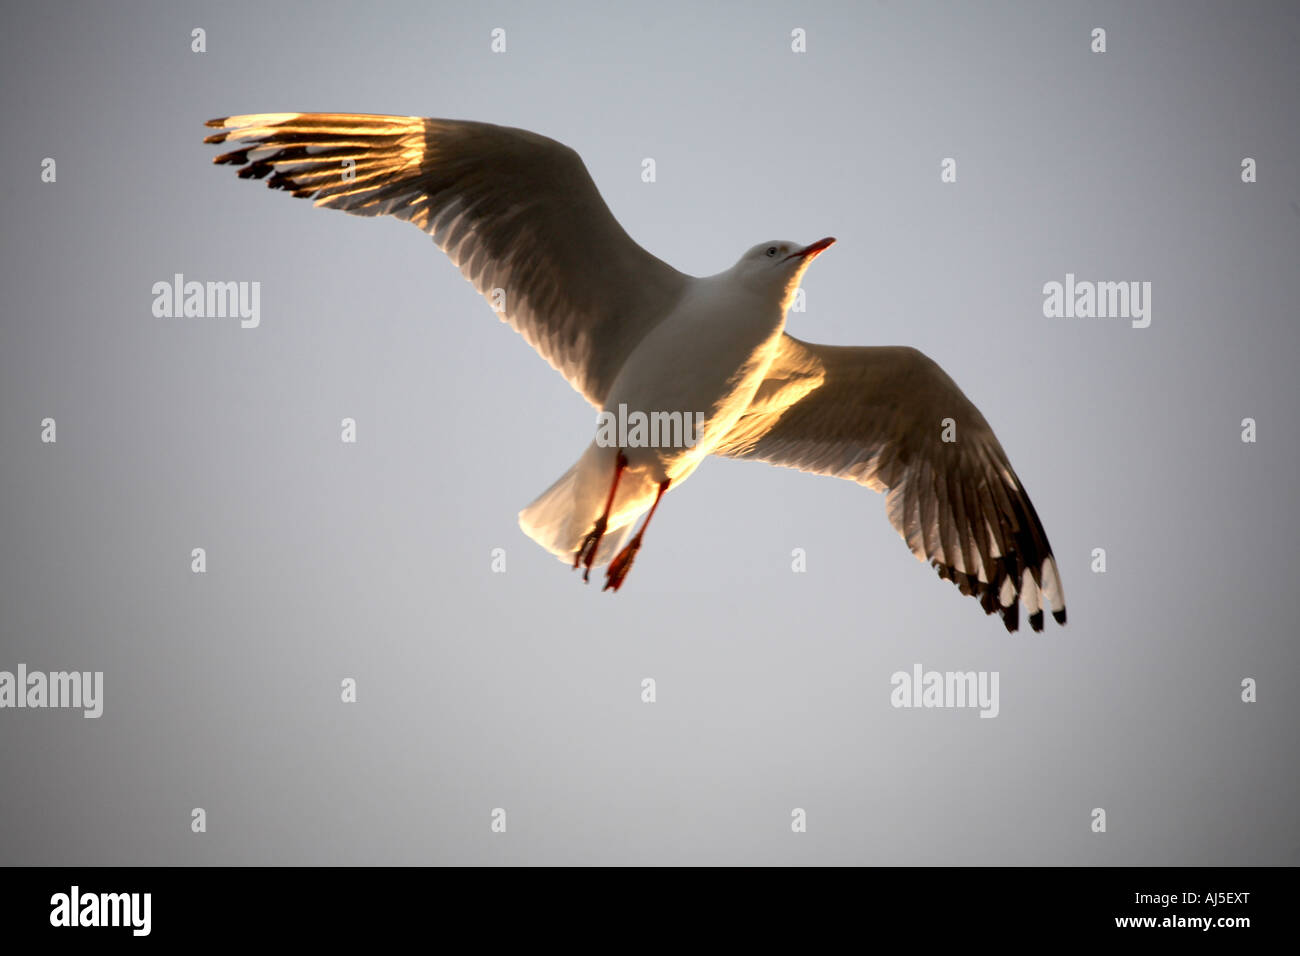 Seagull in soaring flight flying in evening sunlight at Coffs Harbour in New South Wales NSW Australia a Stock Photo